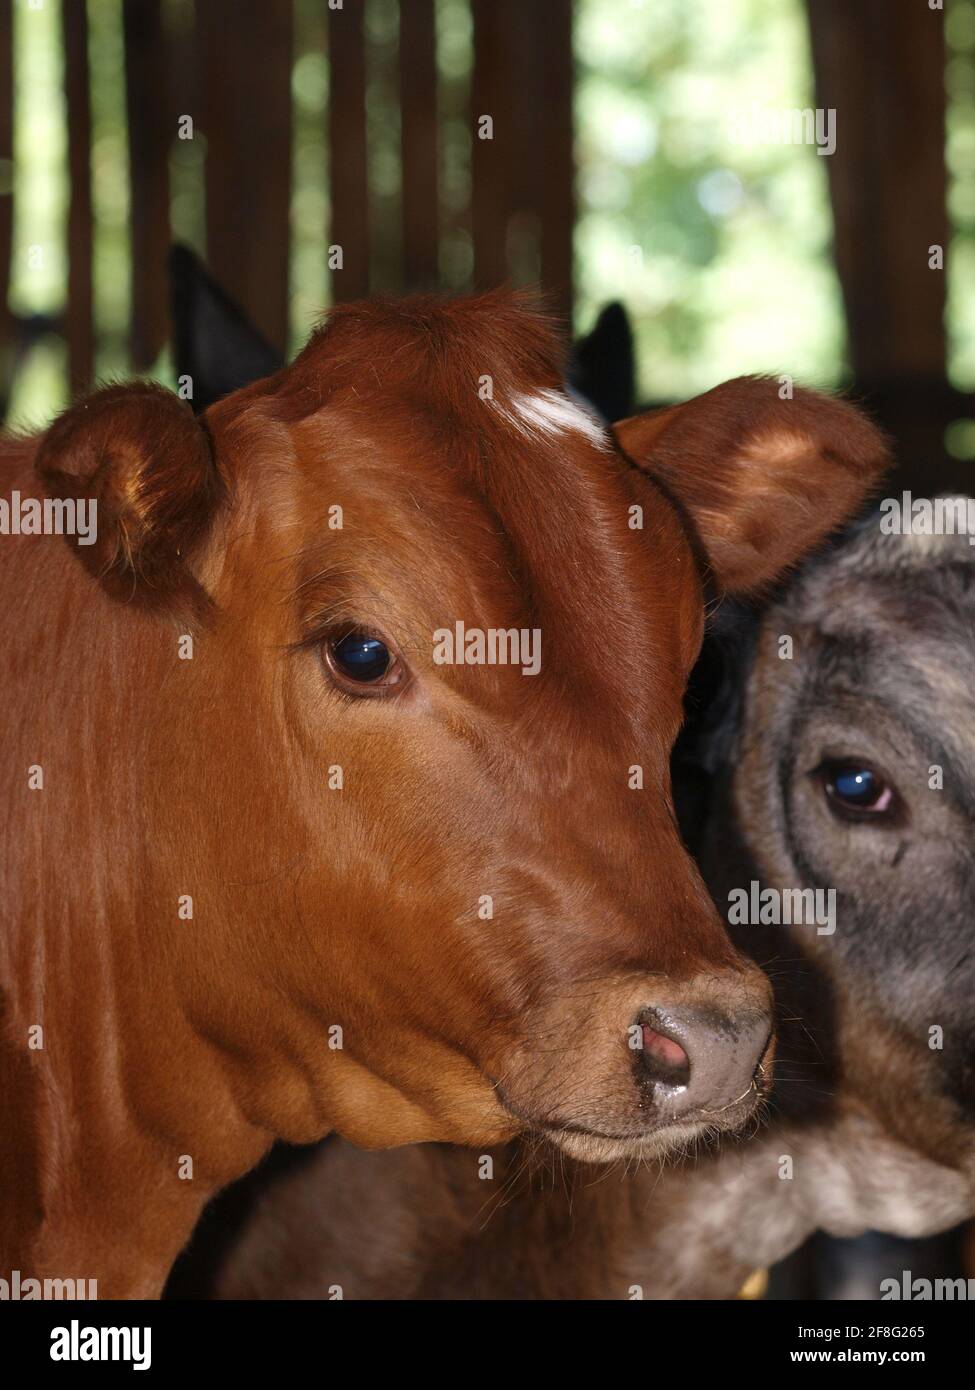 A head shot of a pretty adult cow in a barn. Stock Photo